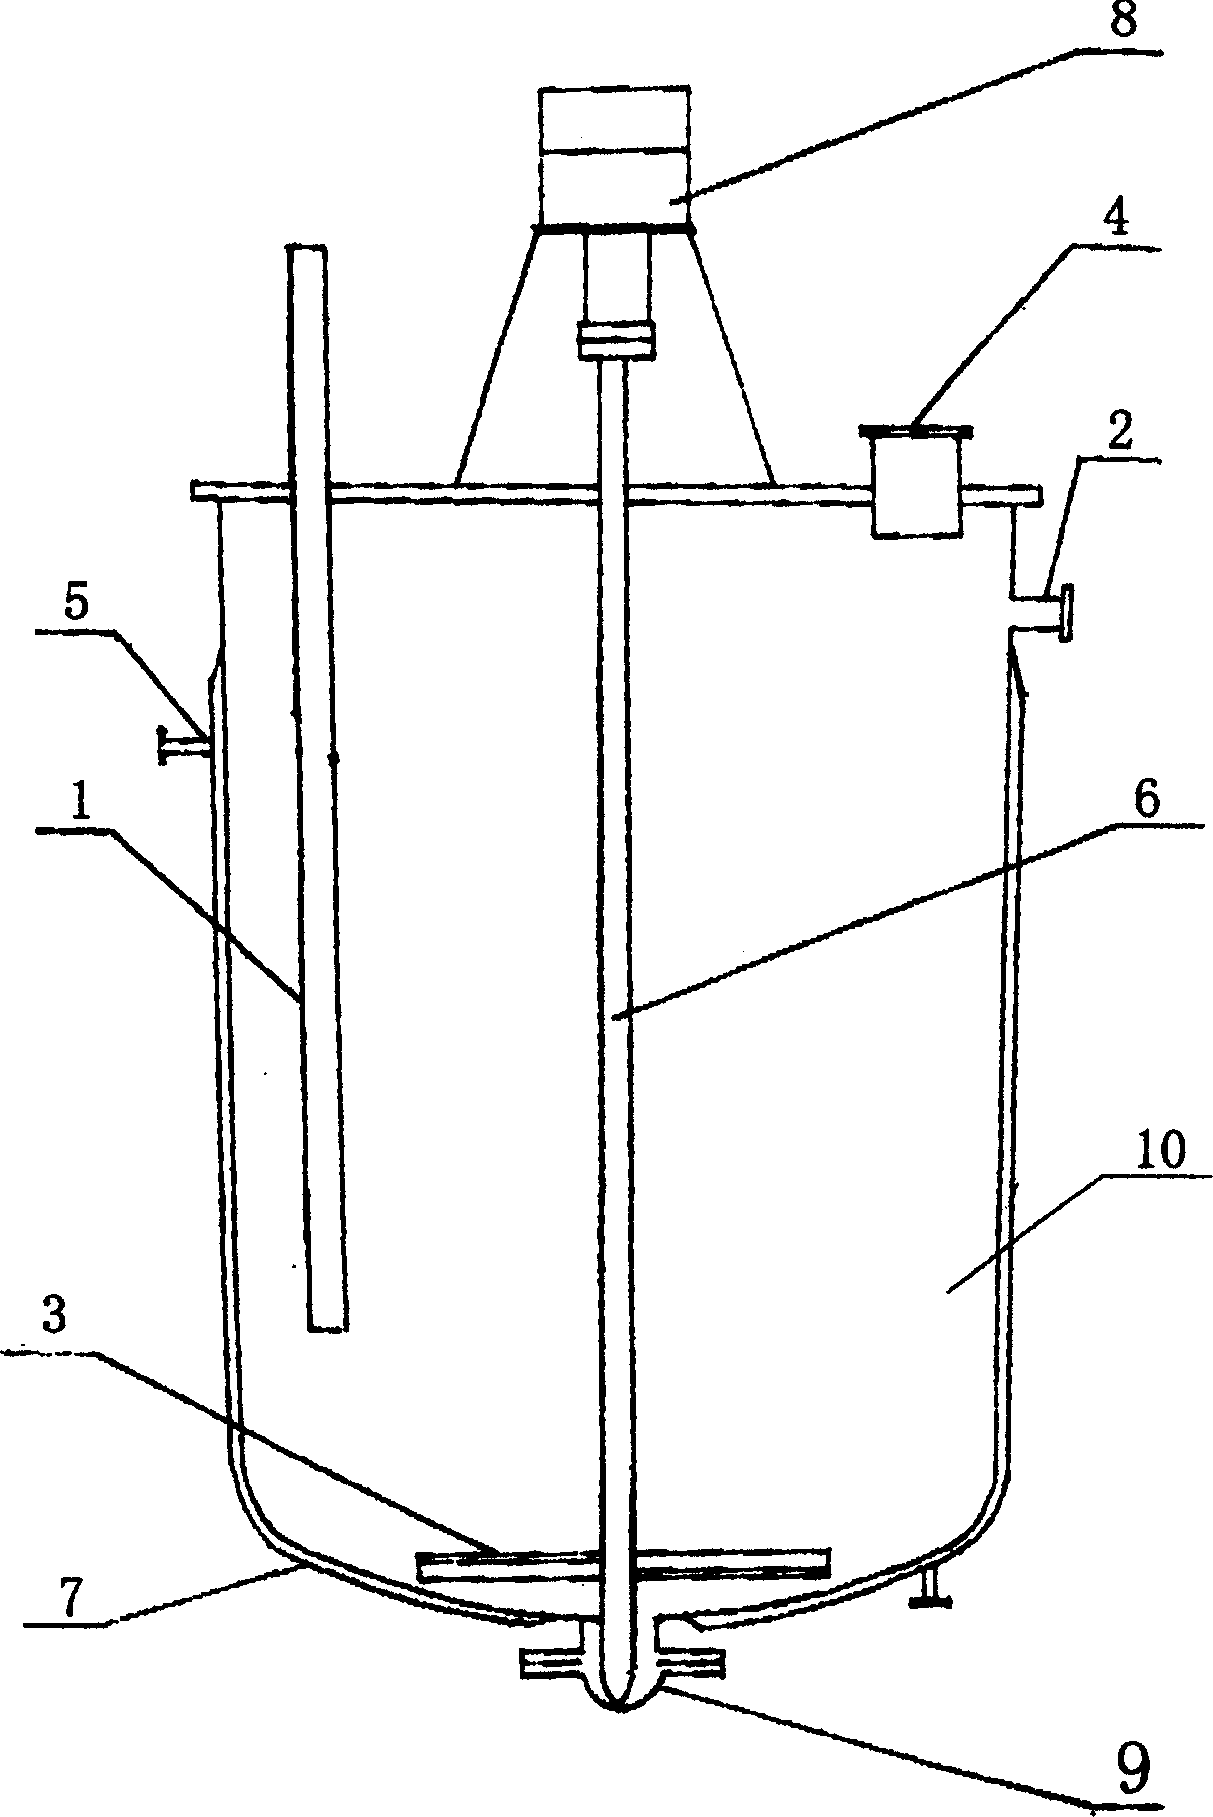 Iron powder reducing method for simultaneously producing organic product and ferric oxide black